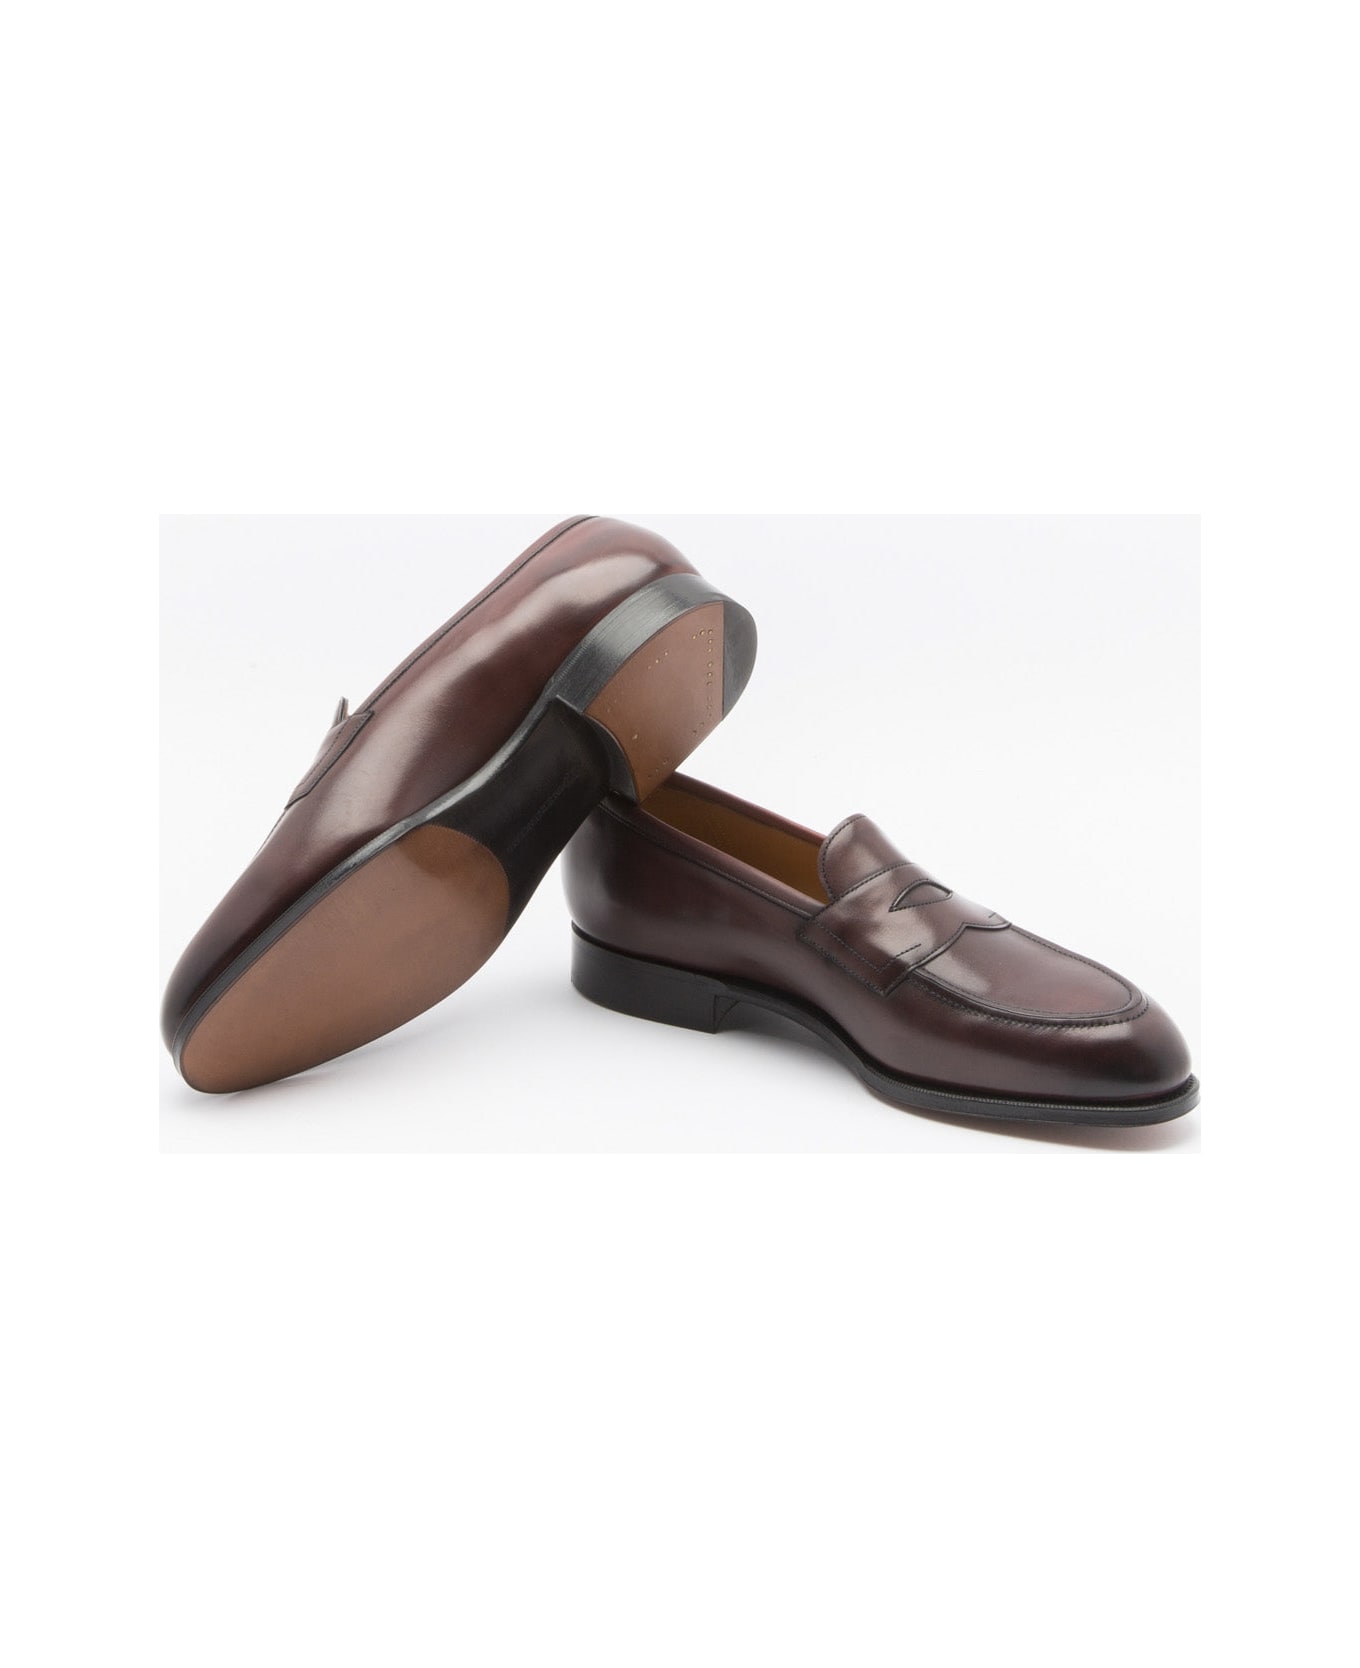 Edward Green Piccadilly Burgundy Antique Calf Penny Loafer - Bordeaux